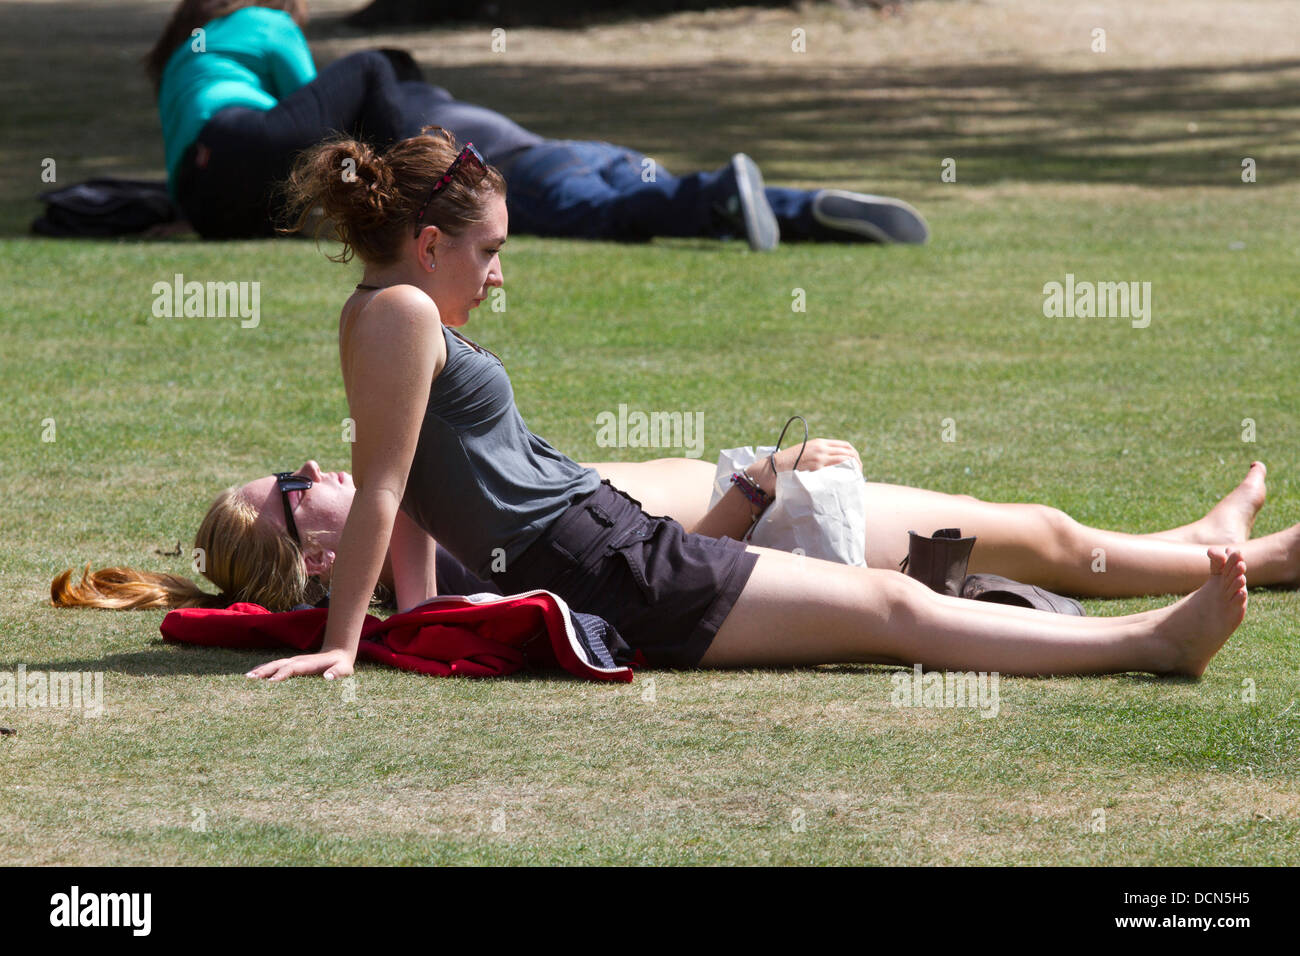 Hyde Park, London, UK. 20th August 2013. People sunbathing in Hyde Park as Londoners enjoy the sunshine and warm weather in the capital Credit:  amer ghazzal/Alamy Live News Stock Photo